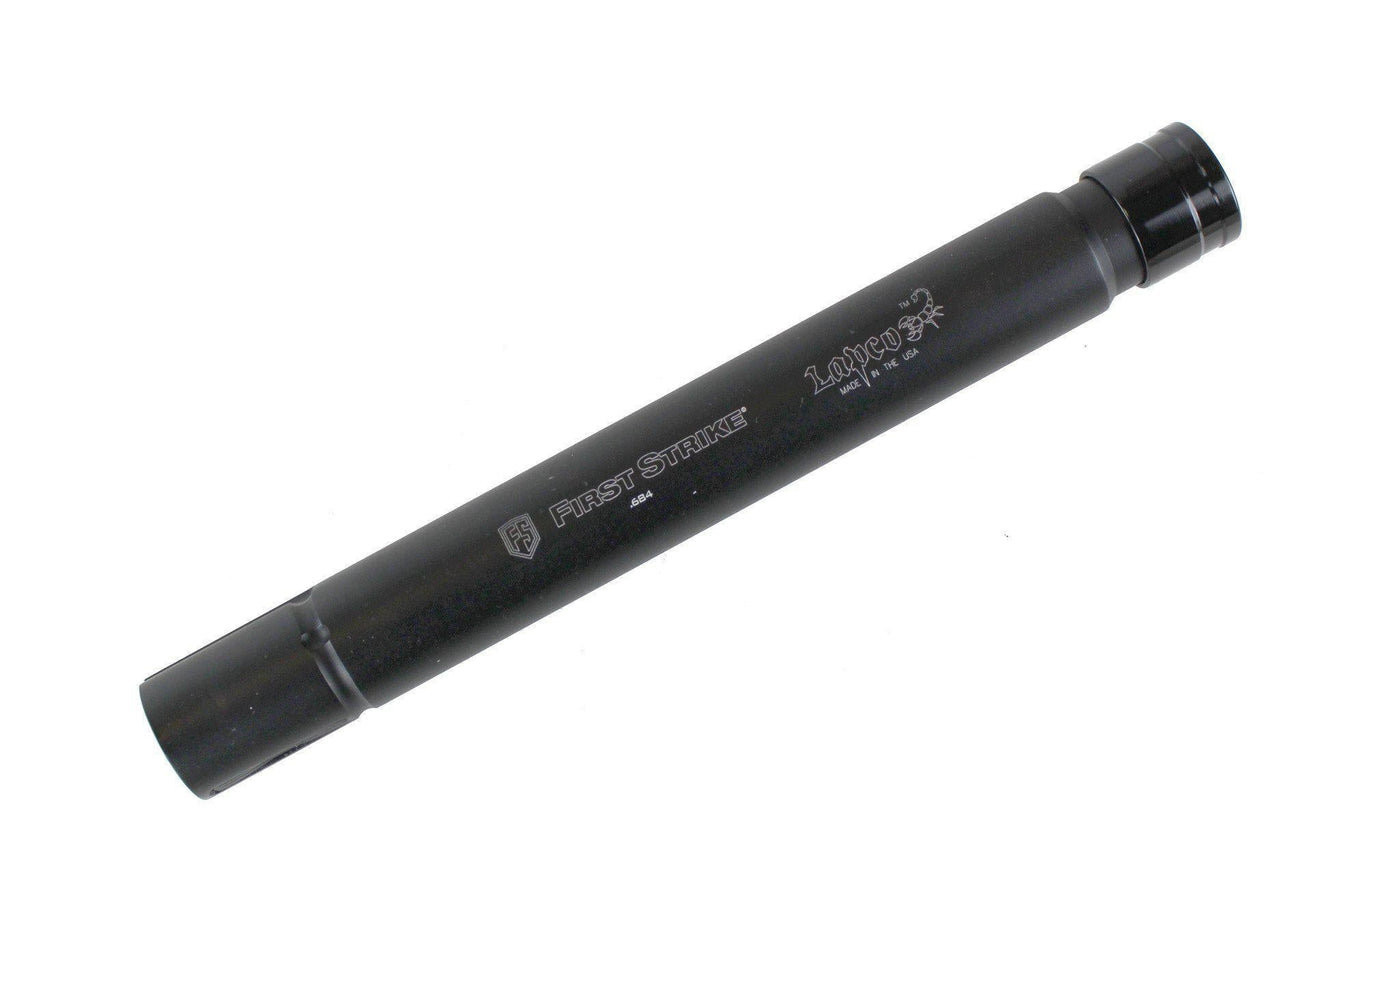 8.5 inch Smooth Bore Lapco FSR Barrel for T15